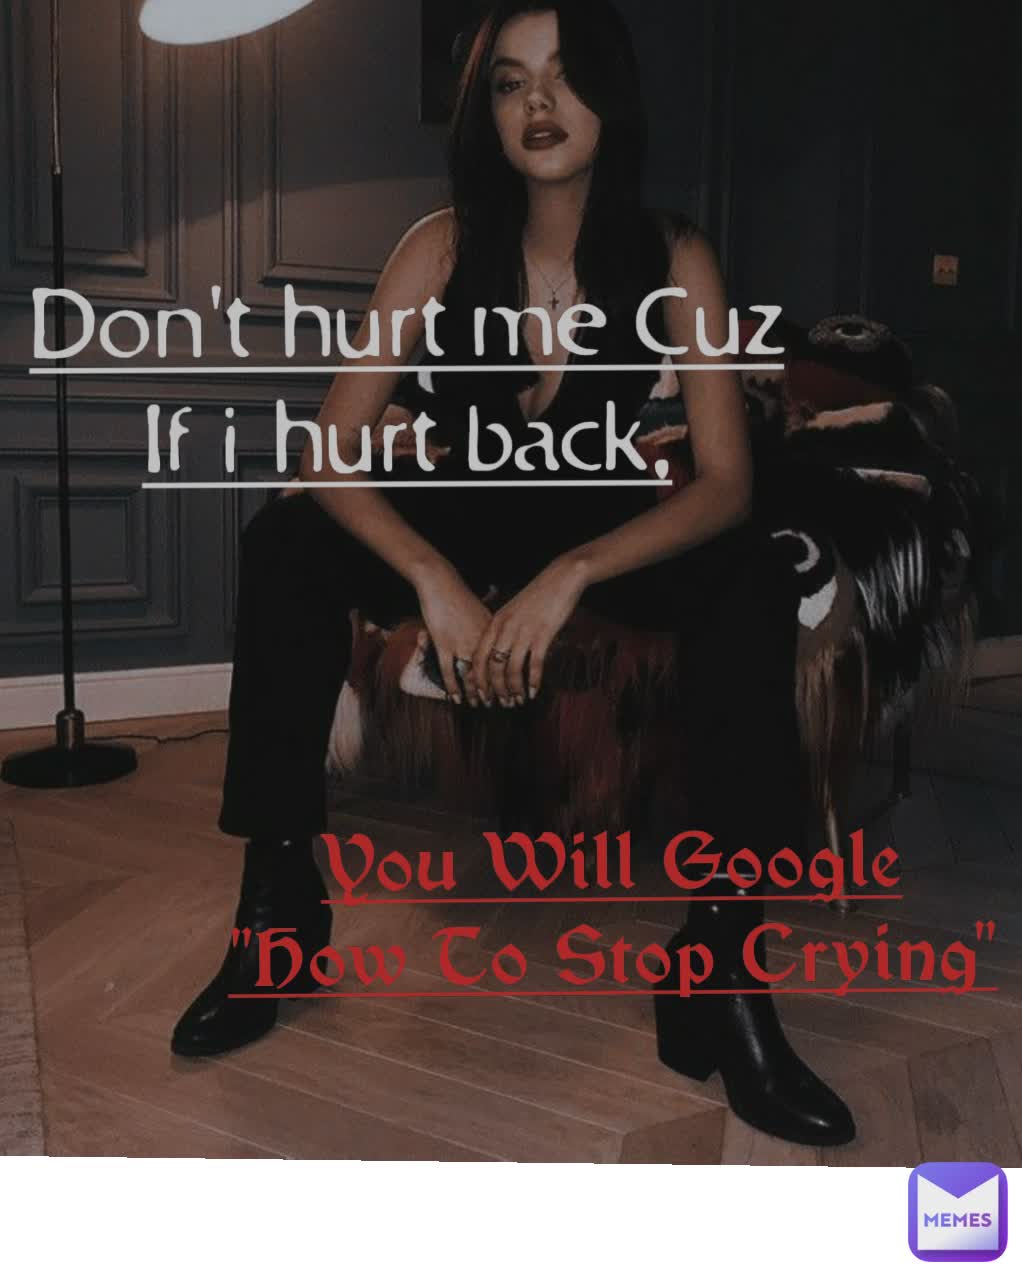 Don't hurt me Cuz
If i hurt back, You Will Google
"How To Stop Crying"